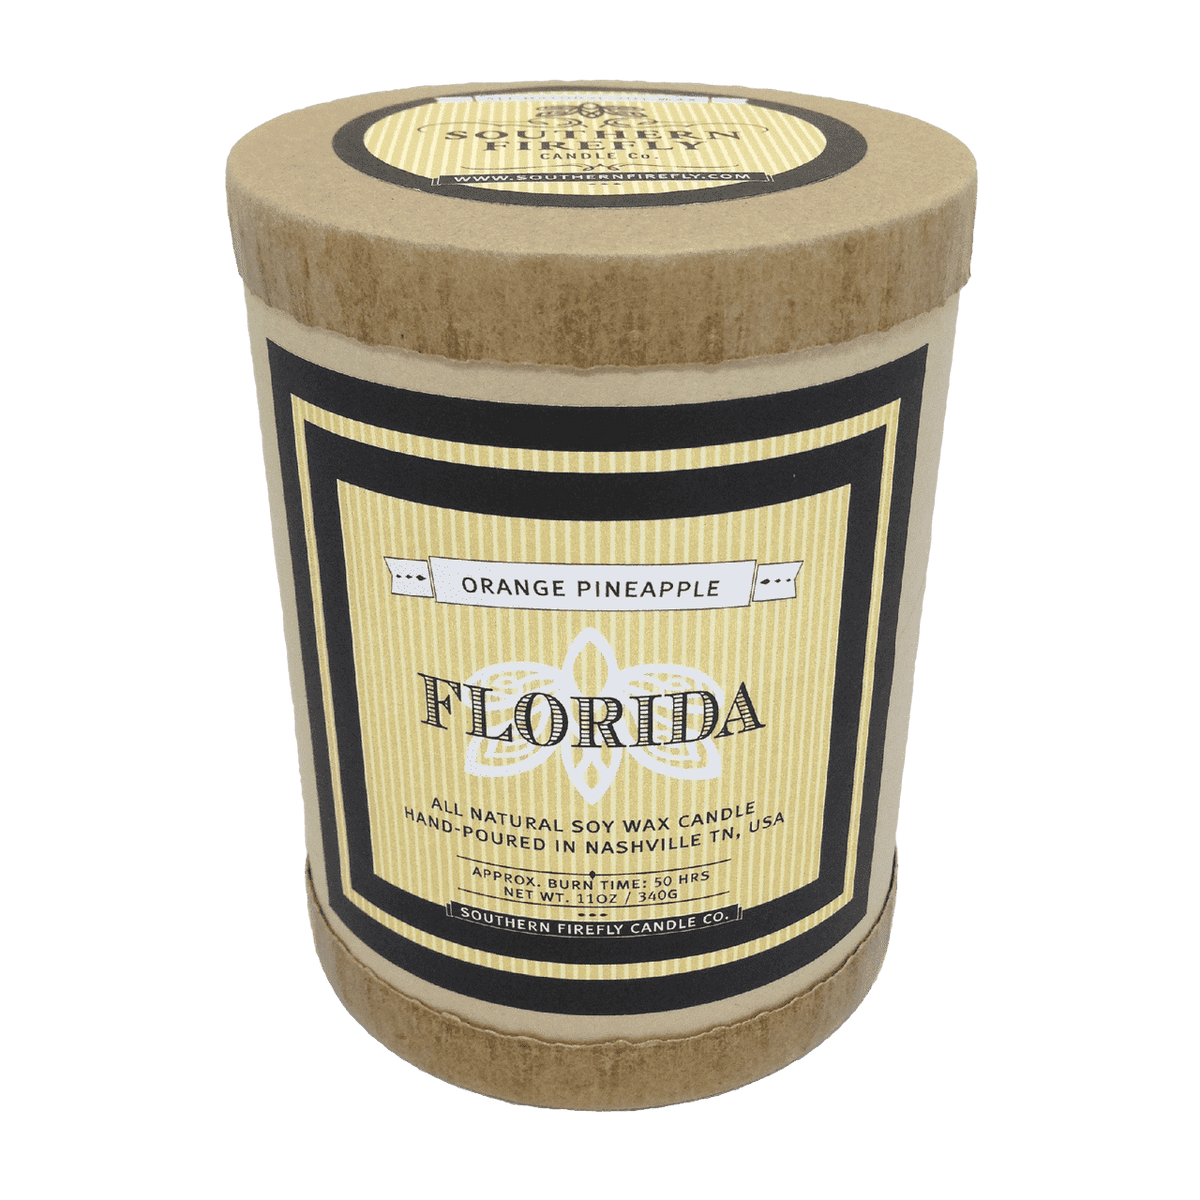 Florida Destination Series Soy Candle in Orange and Pineapple Scent by Southern Firefly Candle Co. - Country Club Prep